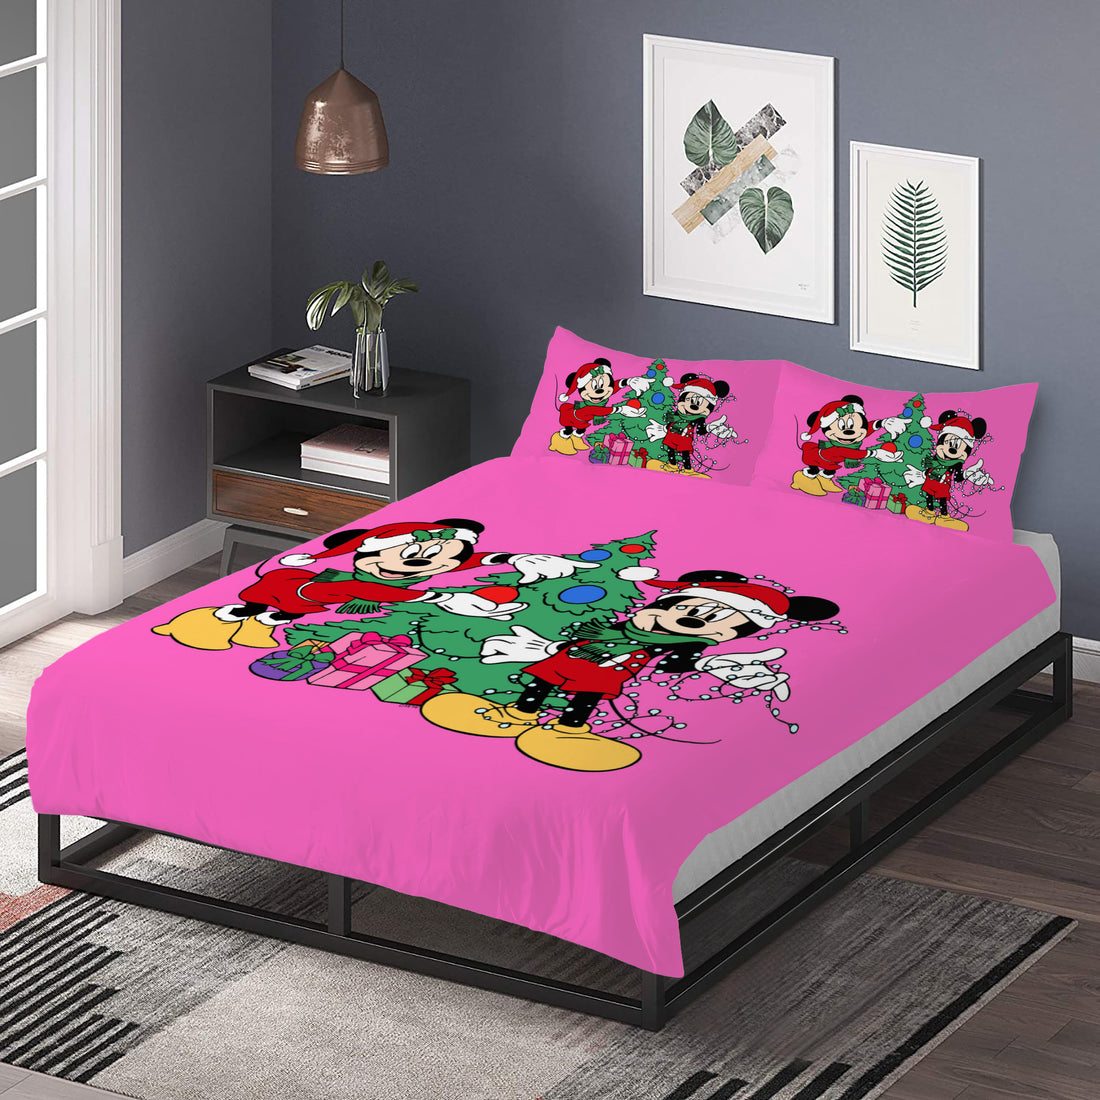 Spread the Holiday Cheer with Minnie and Mickey: Adorable Pink Bedding for a Christmas Cartoon Makeover Home-clothes-jewelry